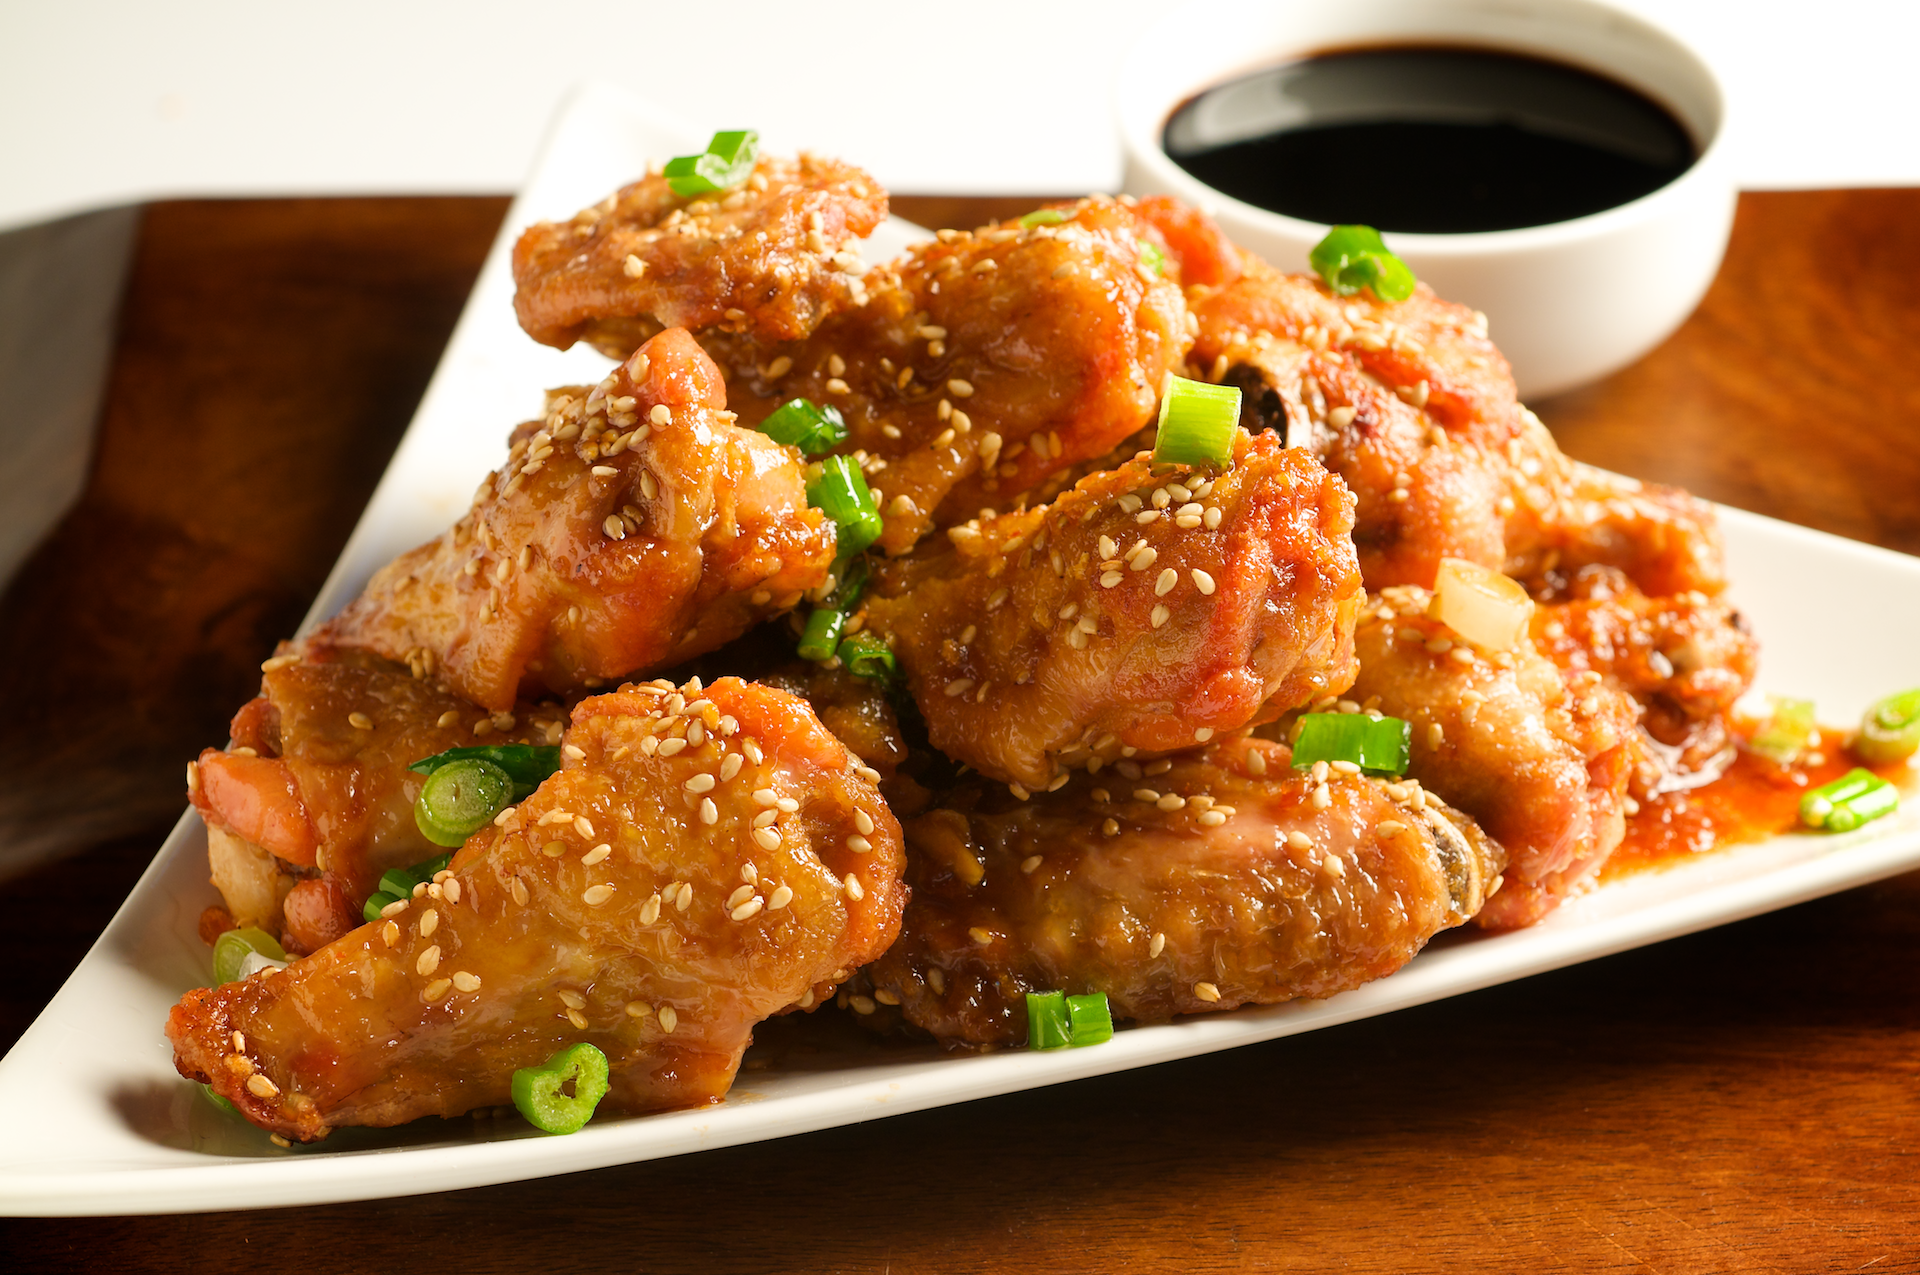 These wings deliver a sweet-heat kick of flavor that will set your dish apart from the other wings, in all the right ways.